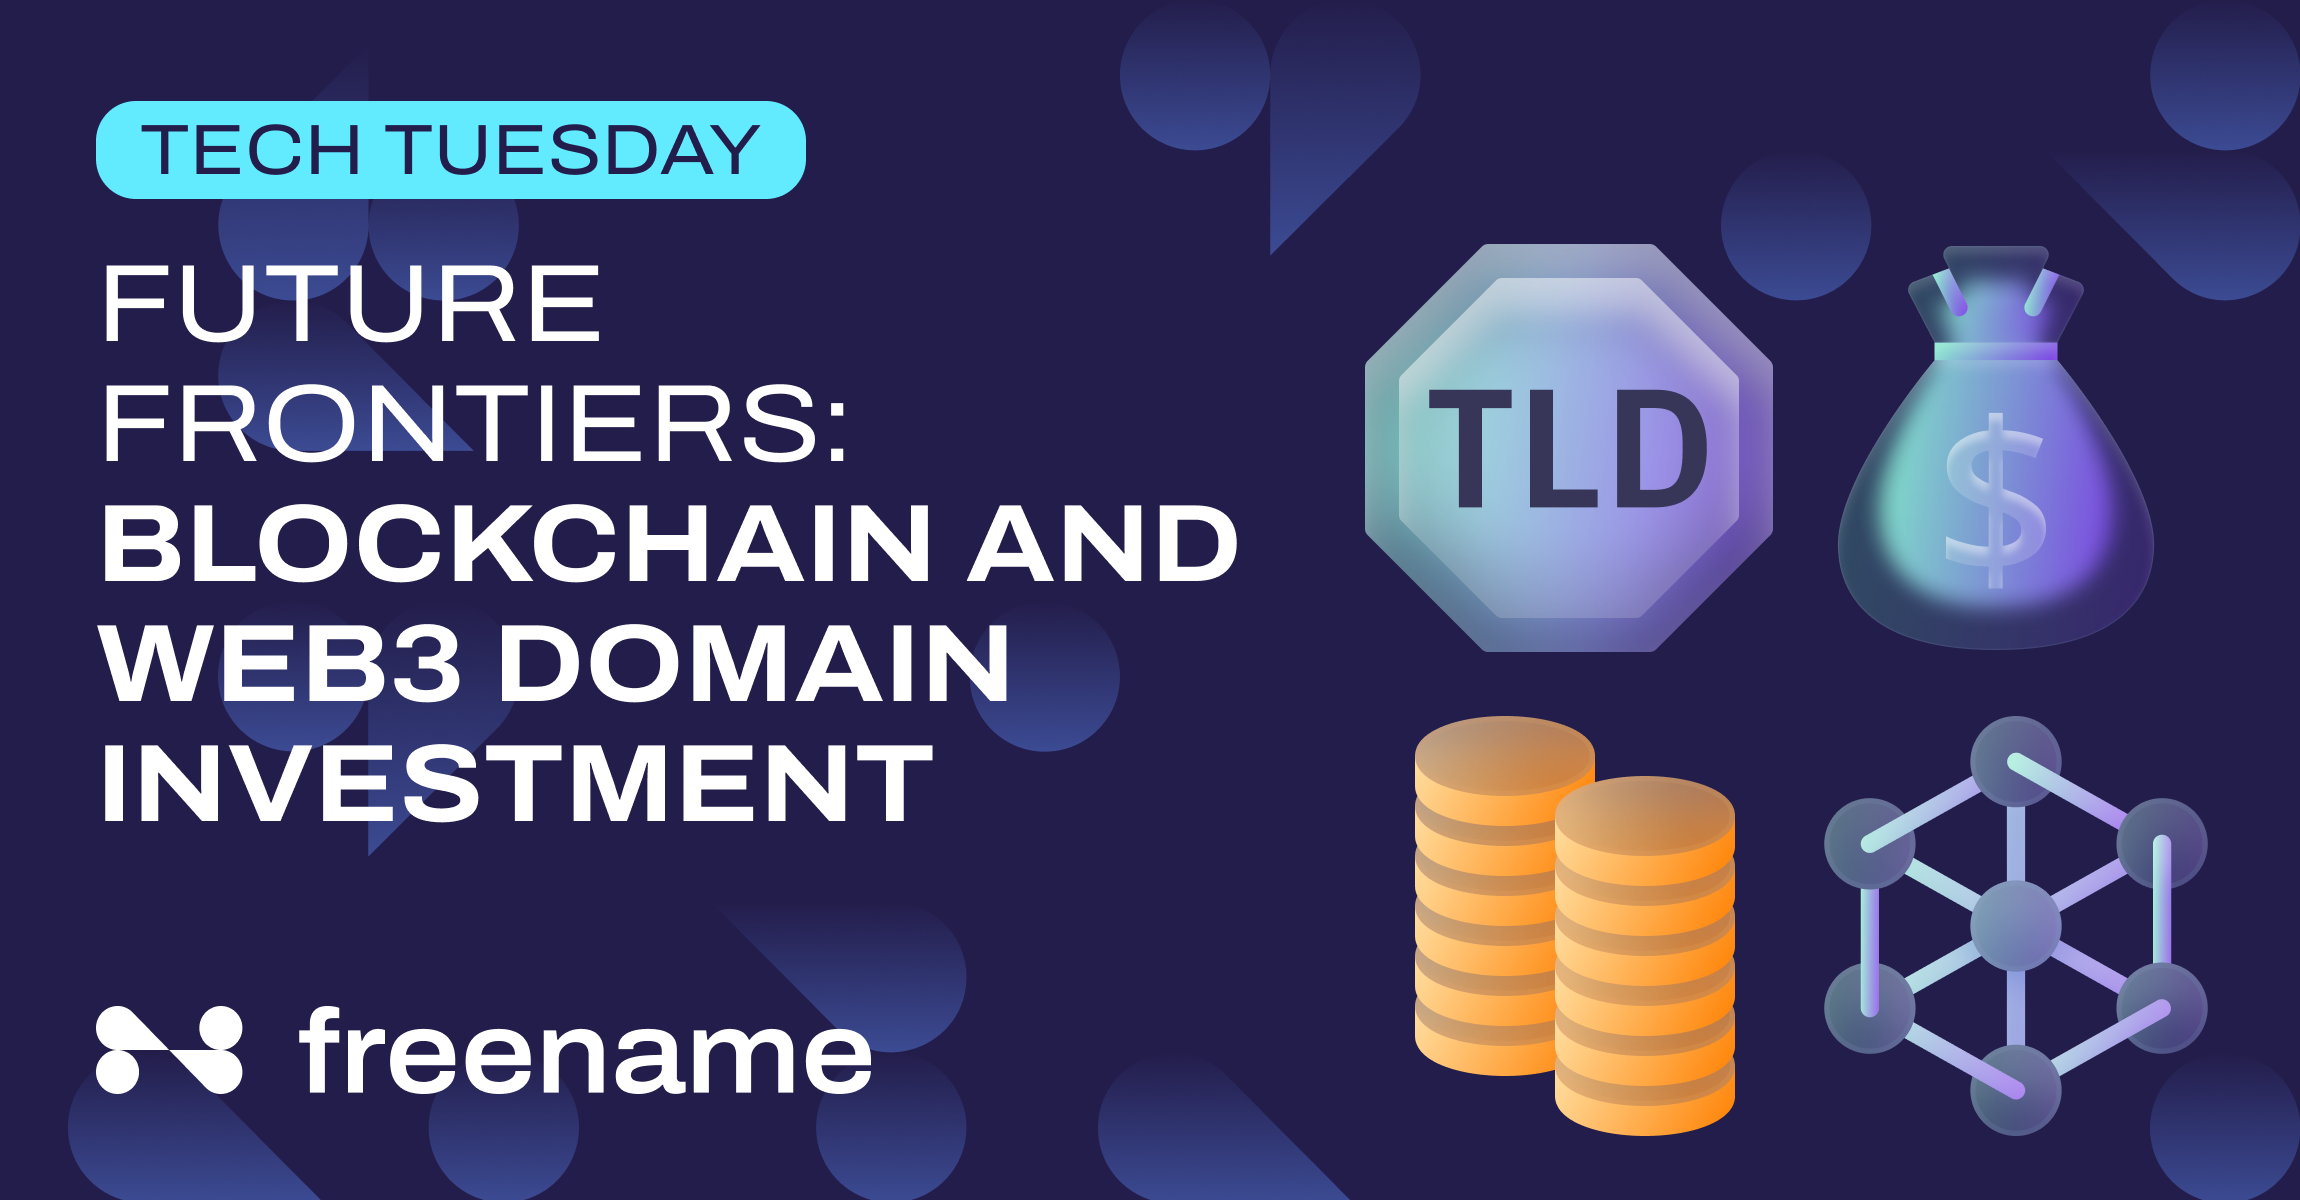 Tech Tuesday: Future Frontiers: Blockchain and Web3 Domain Investment